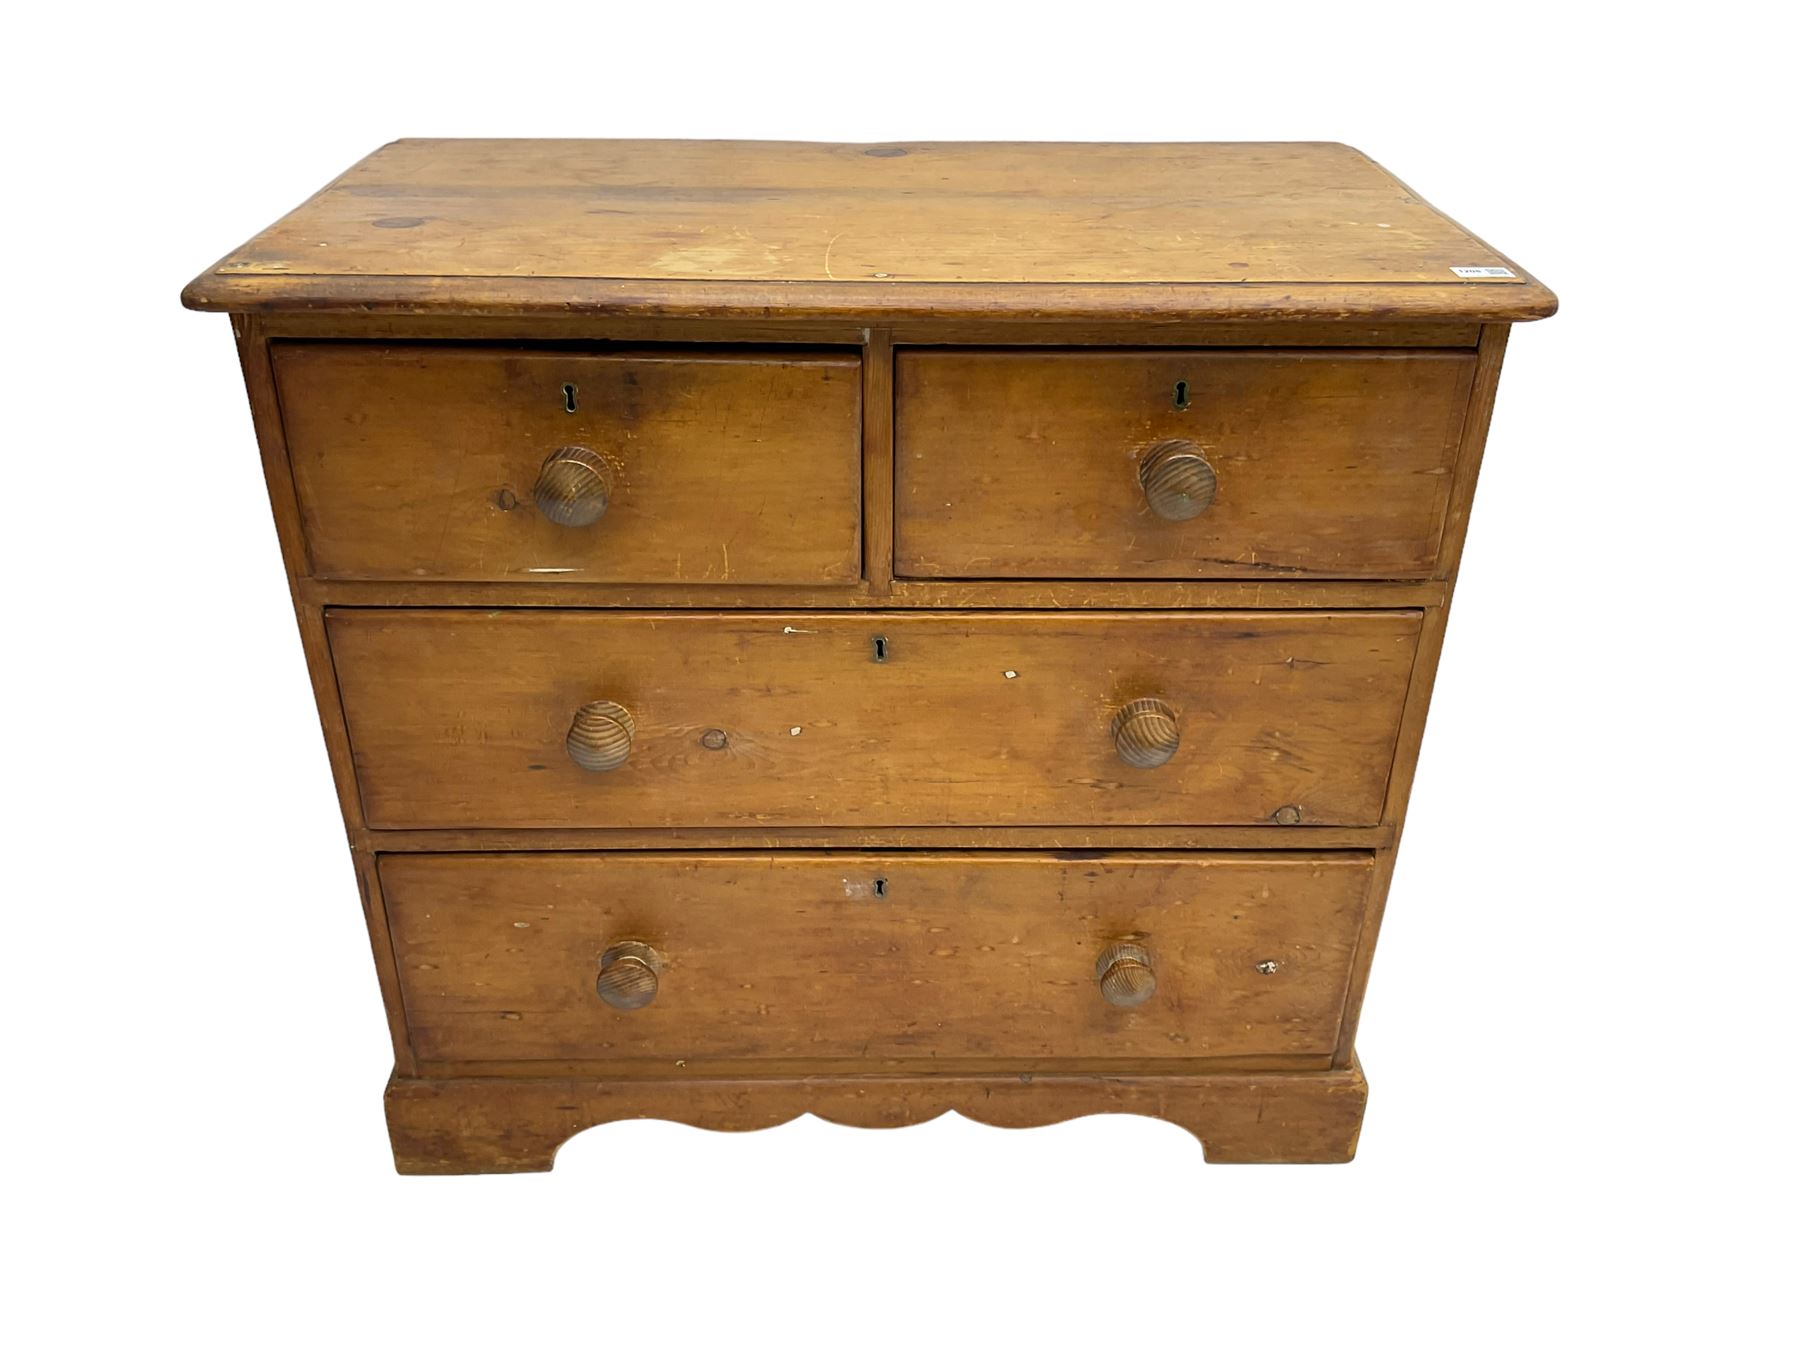 Late 19th century waxed pine chest - Image 8 of 8